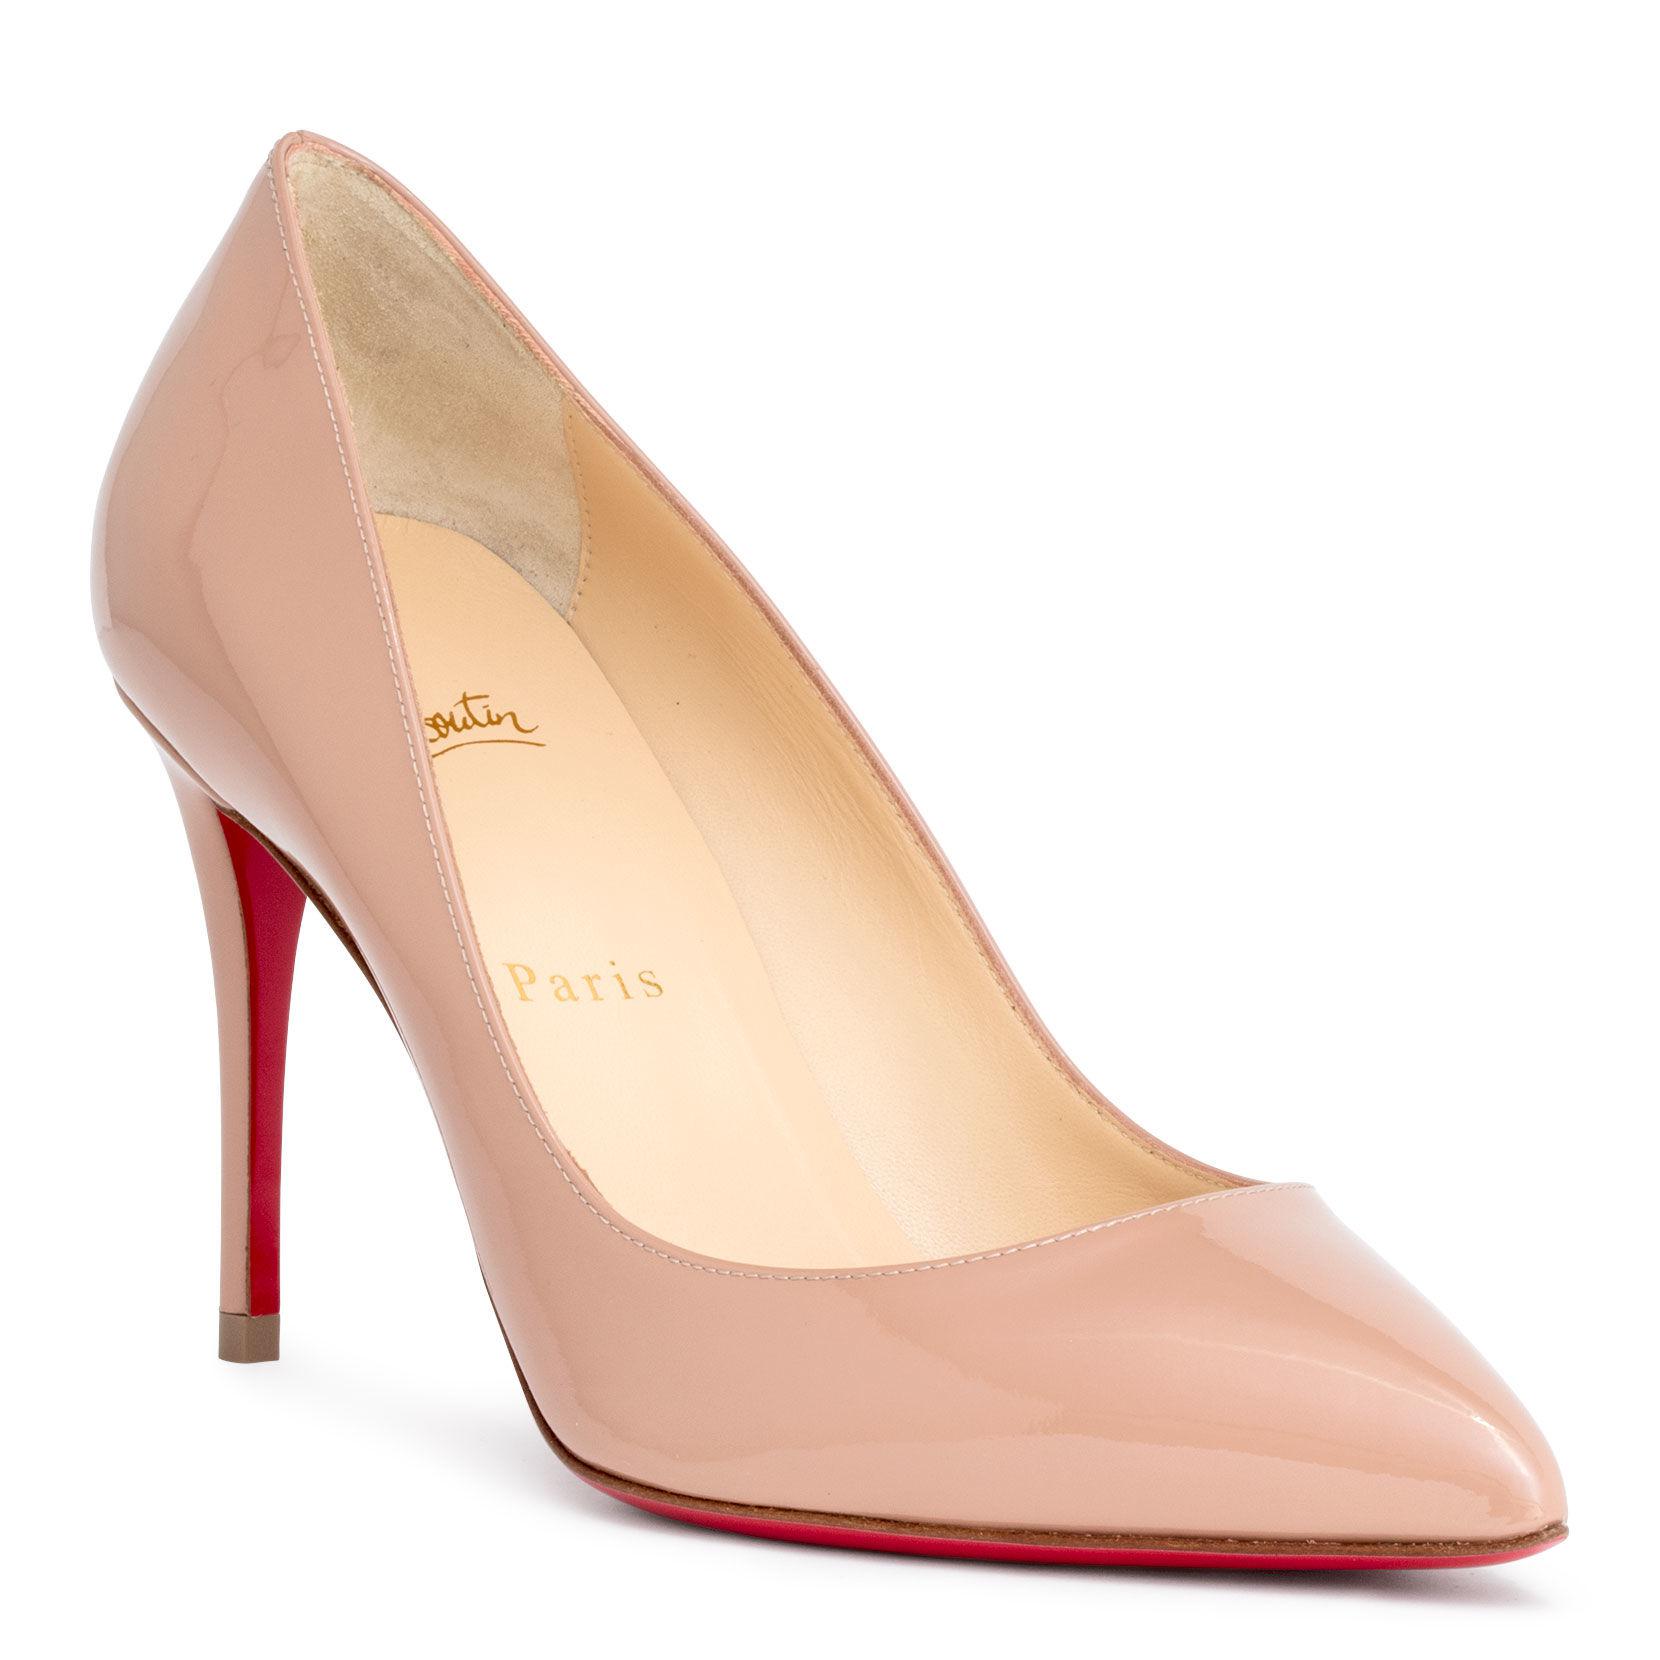 Christian Louboutin Pigalle Follies 85 Beige Patent Pumps in Natural - Lyst